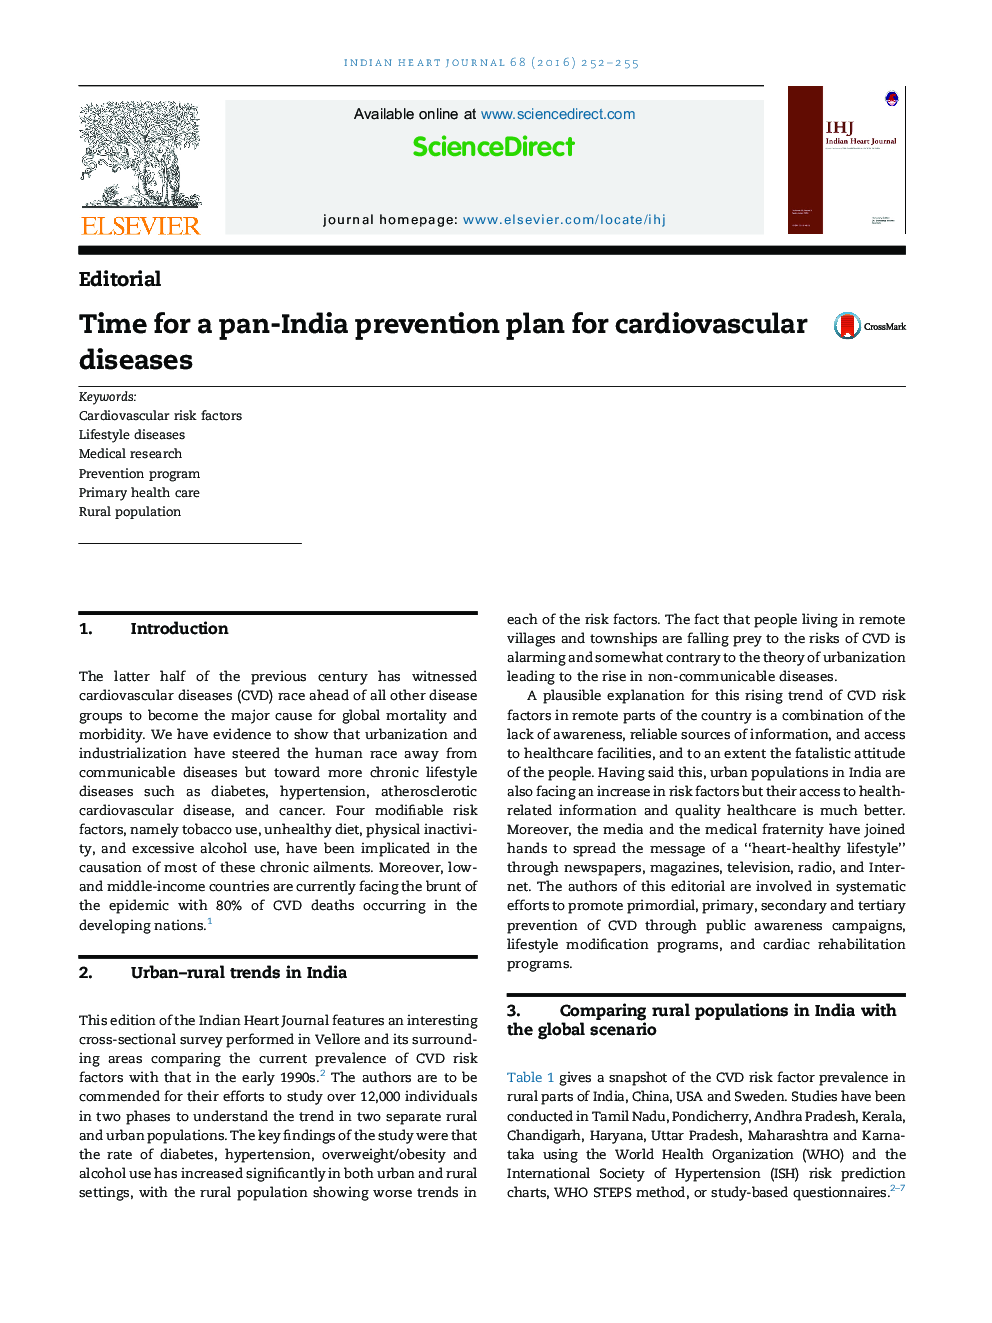 Time for a pan-India prevention plan for cardiovascular diseases